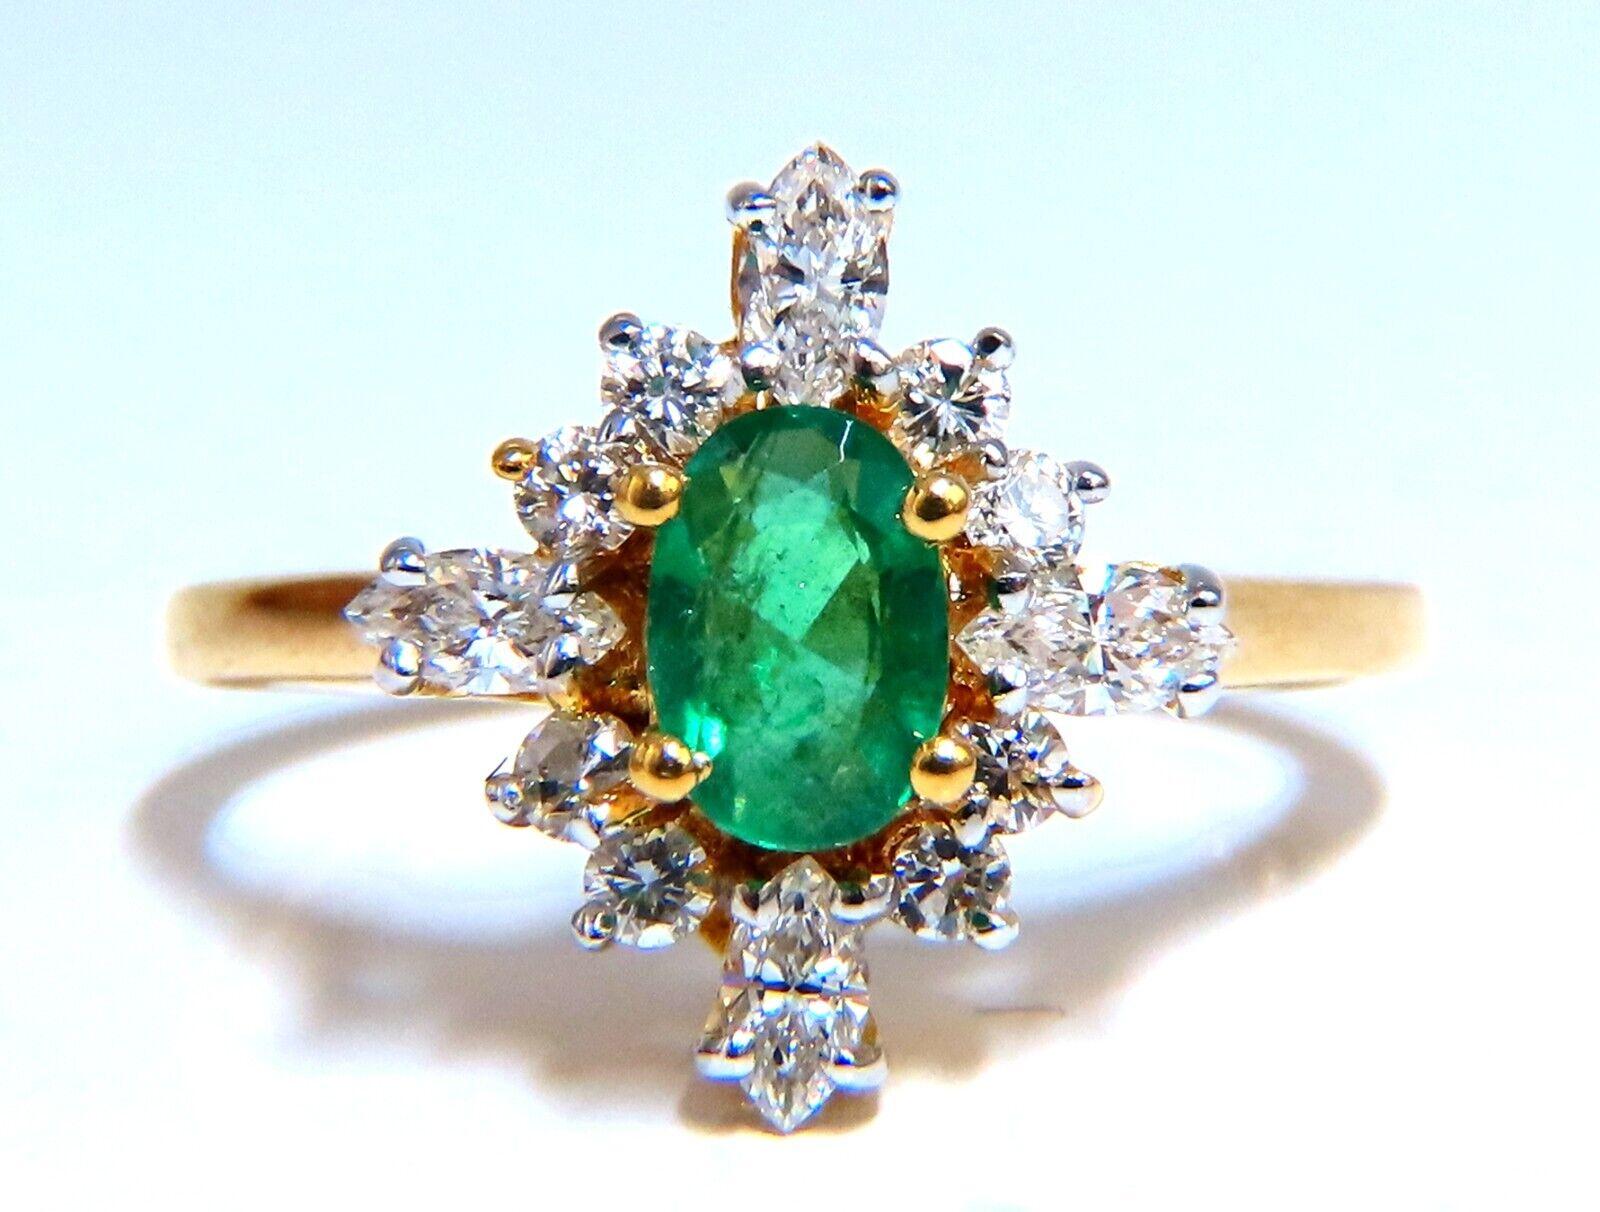 .60ct Natural Oval emerald ring.

6x4mm emerald, even green clean clarity and transparent.

.60 carat natural marquise & round diamond

H-I color Vs-2 Si-1 clarity

14 karat yellow gold 3.5 grams

Depth of ring 8 mm

Size 5.75 we may resize please